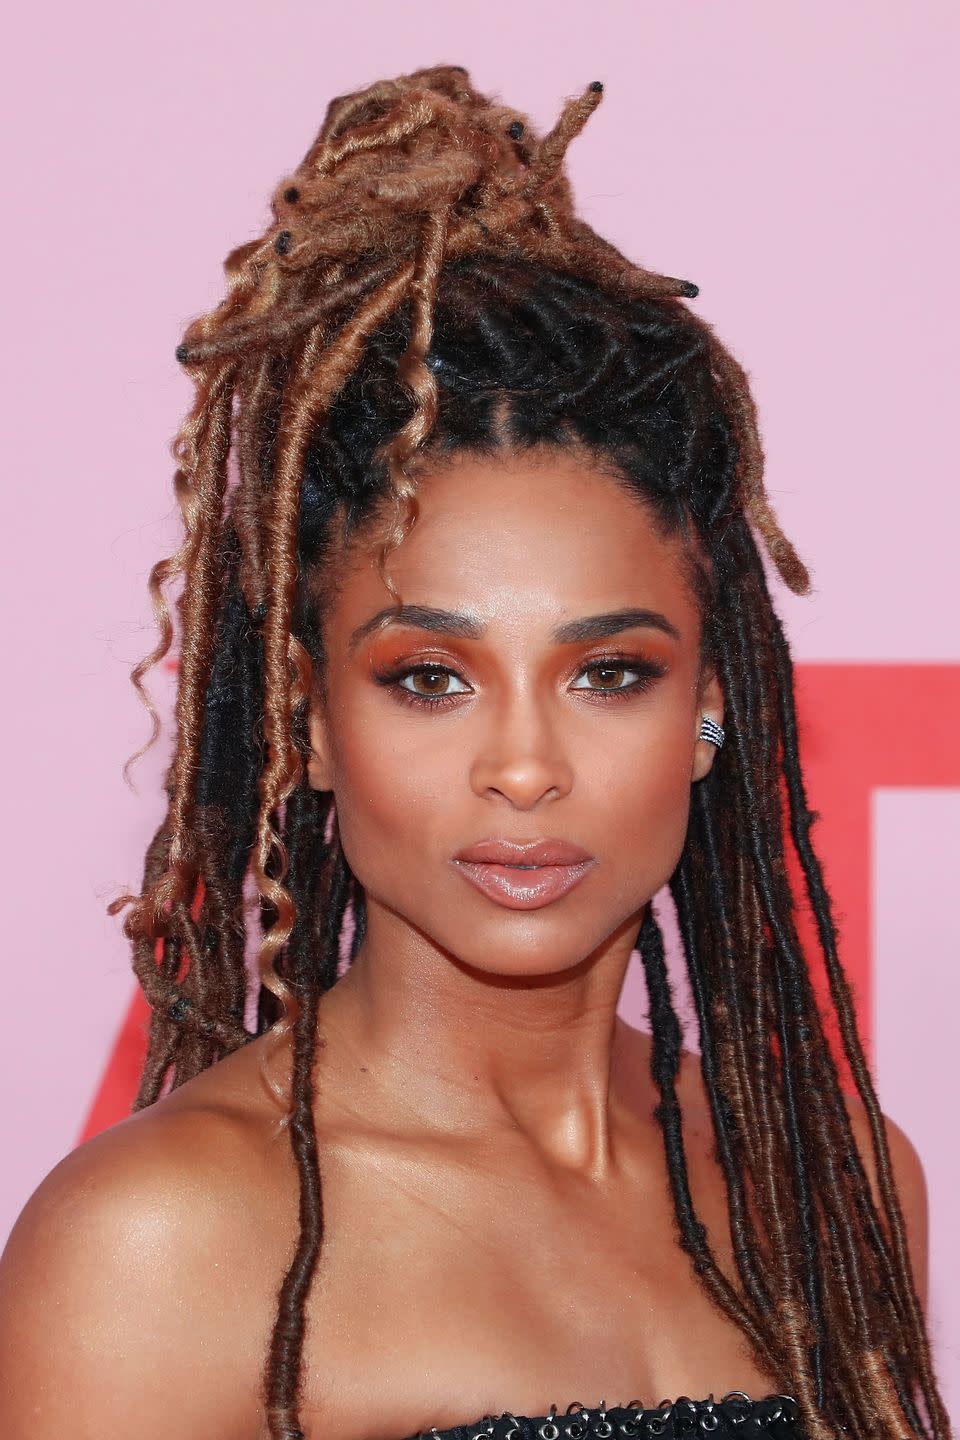 <p>Ask your hairstylist to leave some curly pieces on the ends of your long dreadlocks, as you see here on singer Ciara.</p>